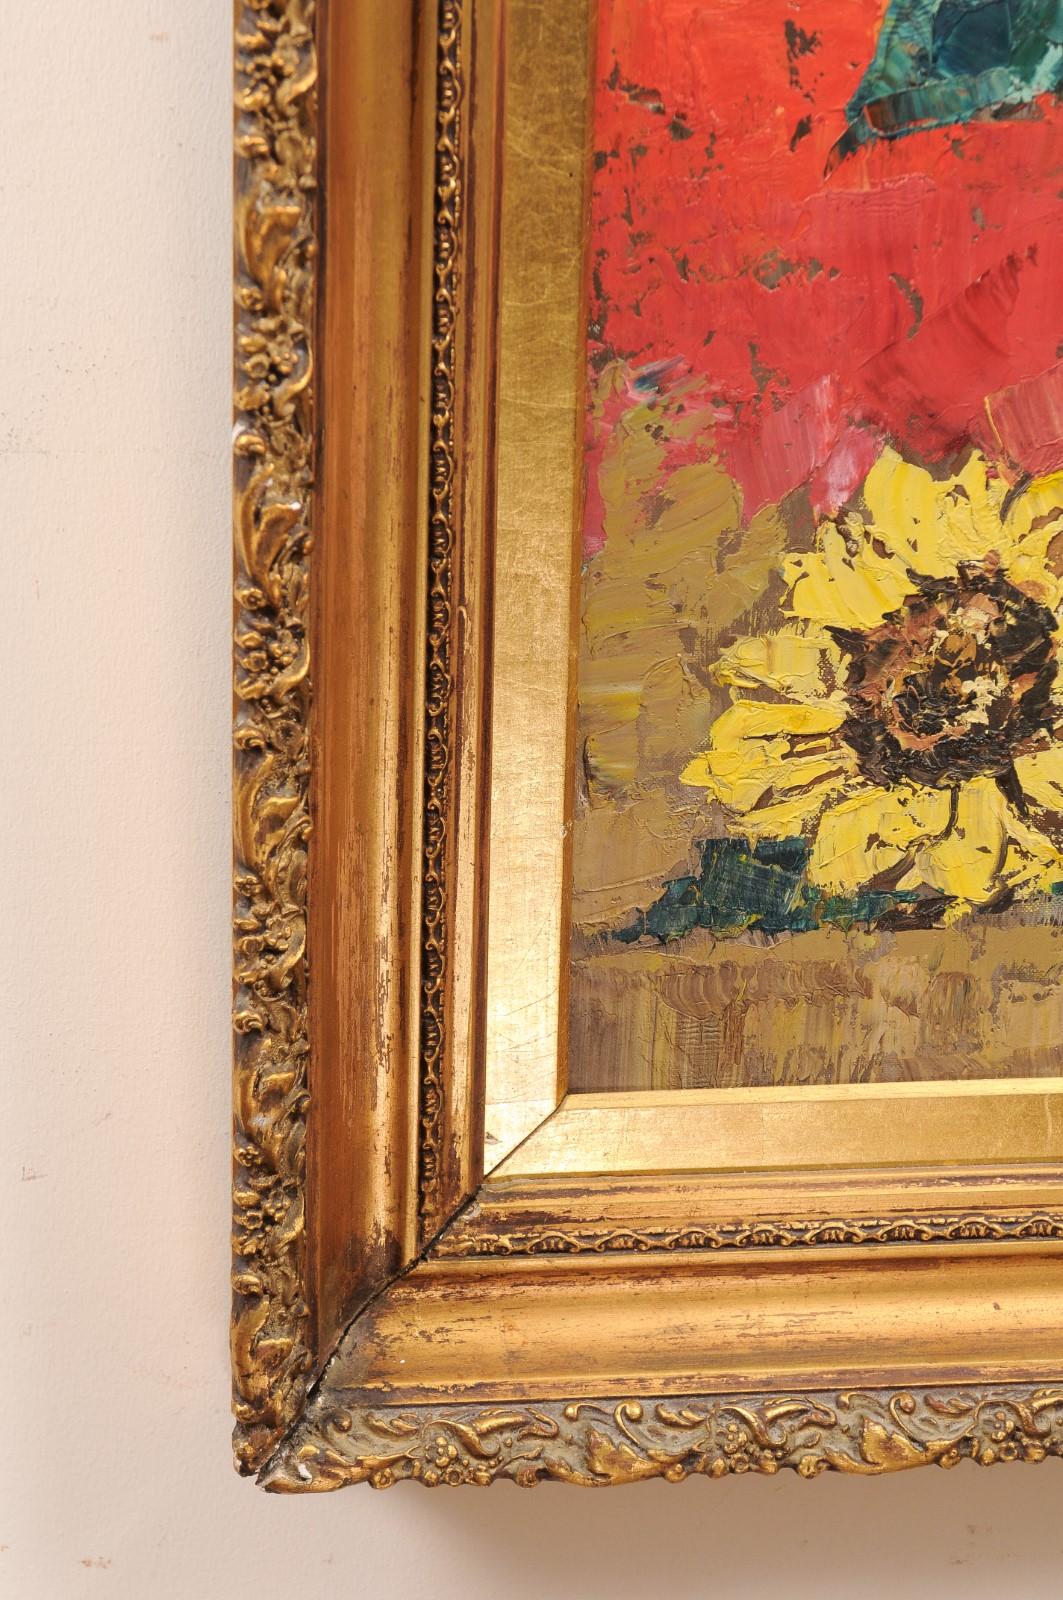  Giltwood Framed Oil on Board Painting of Sunflowers in Vase, Signed, 20th c. For Sale 5